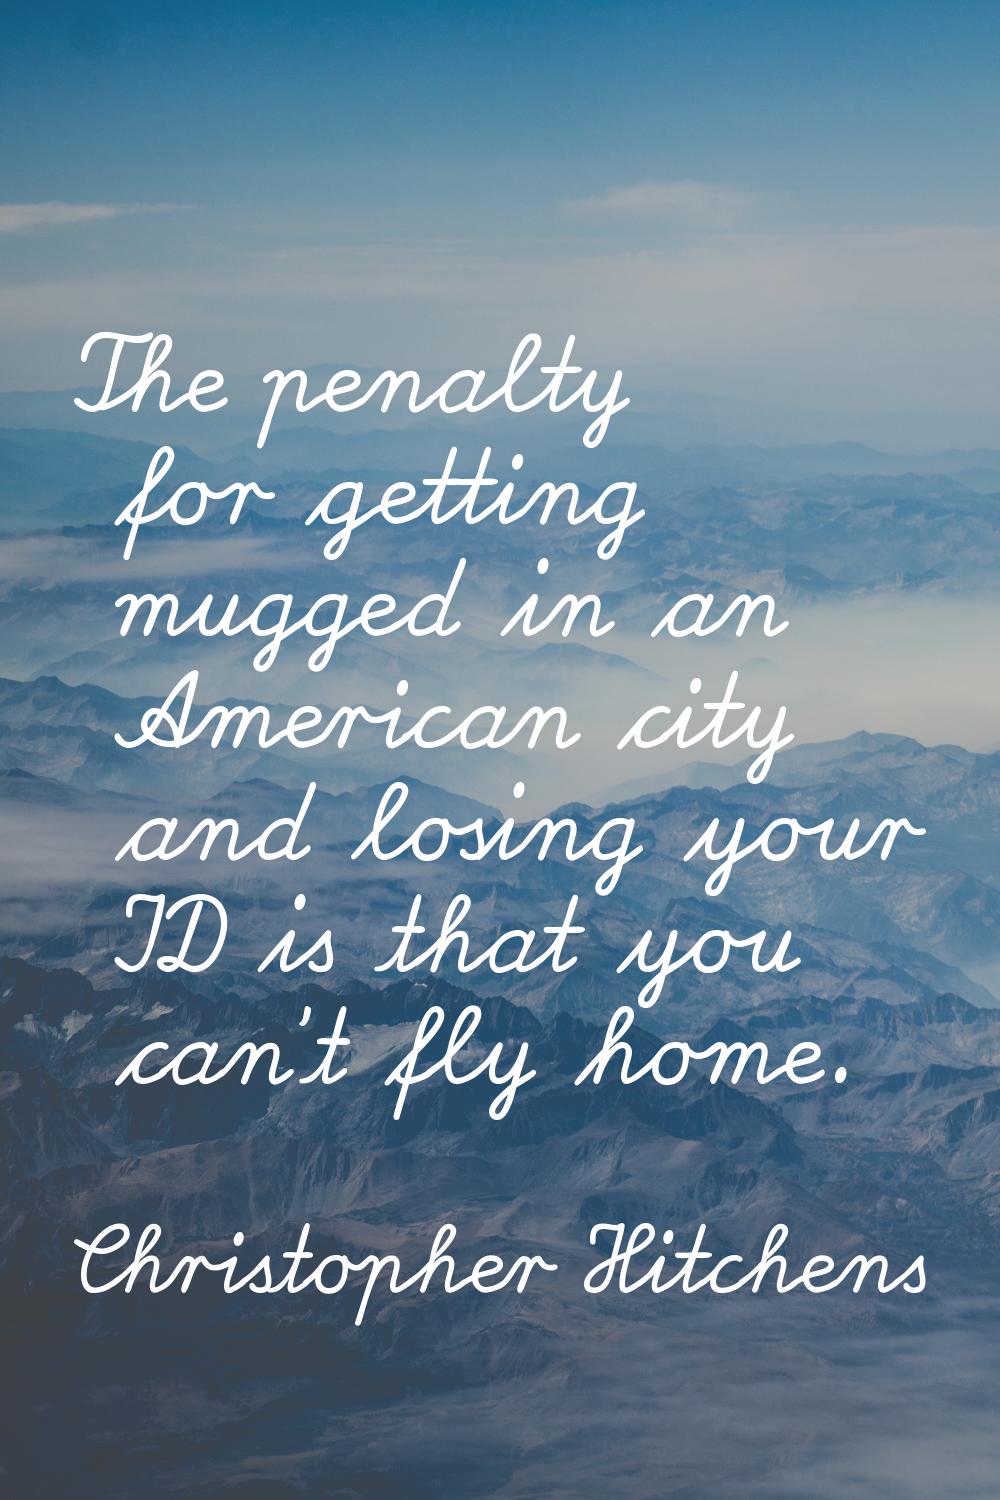 The penalty for getting mugged in an American city and losing your ID is that you can't fly home.